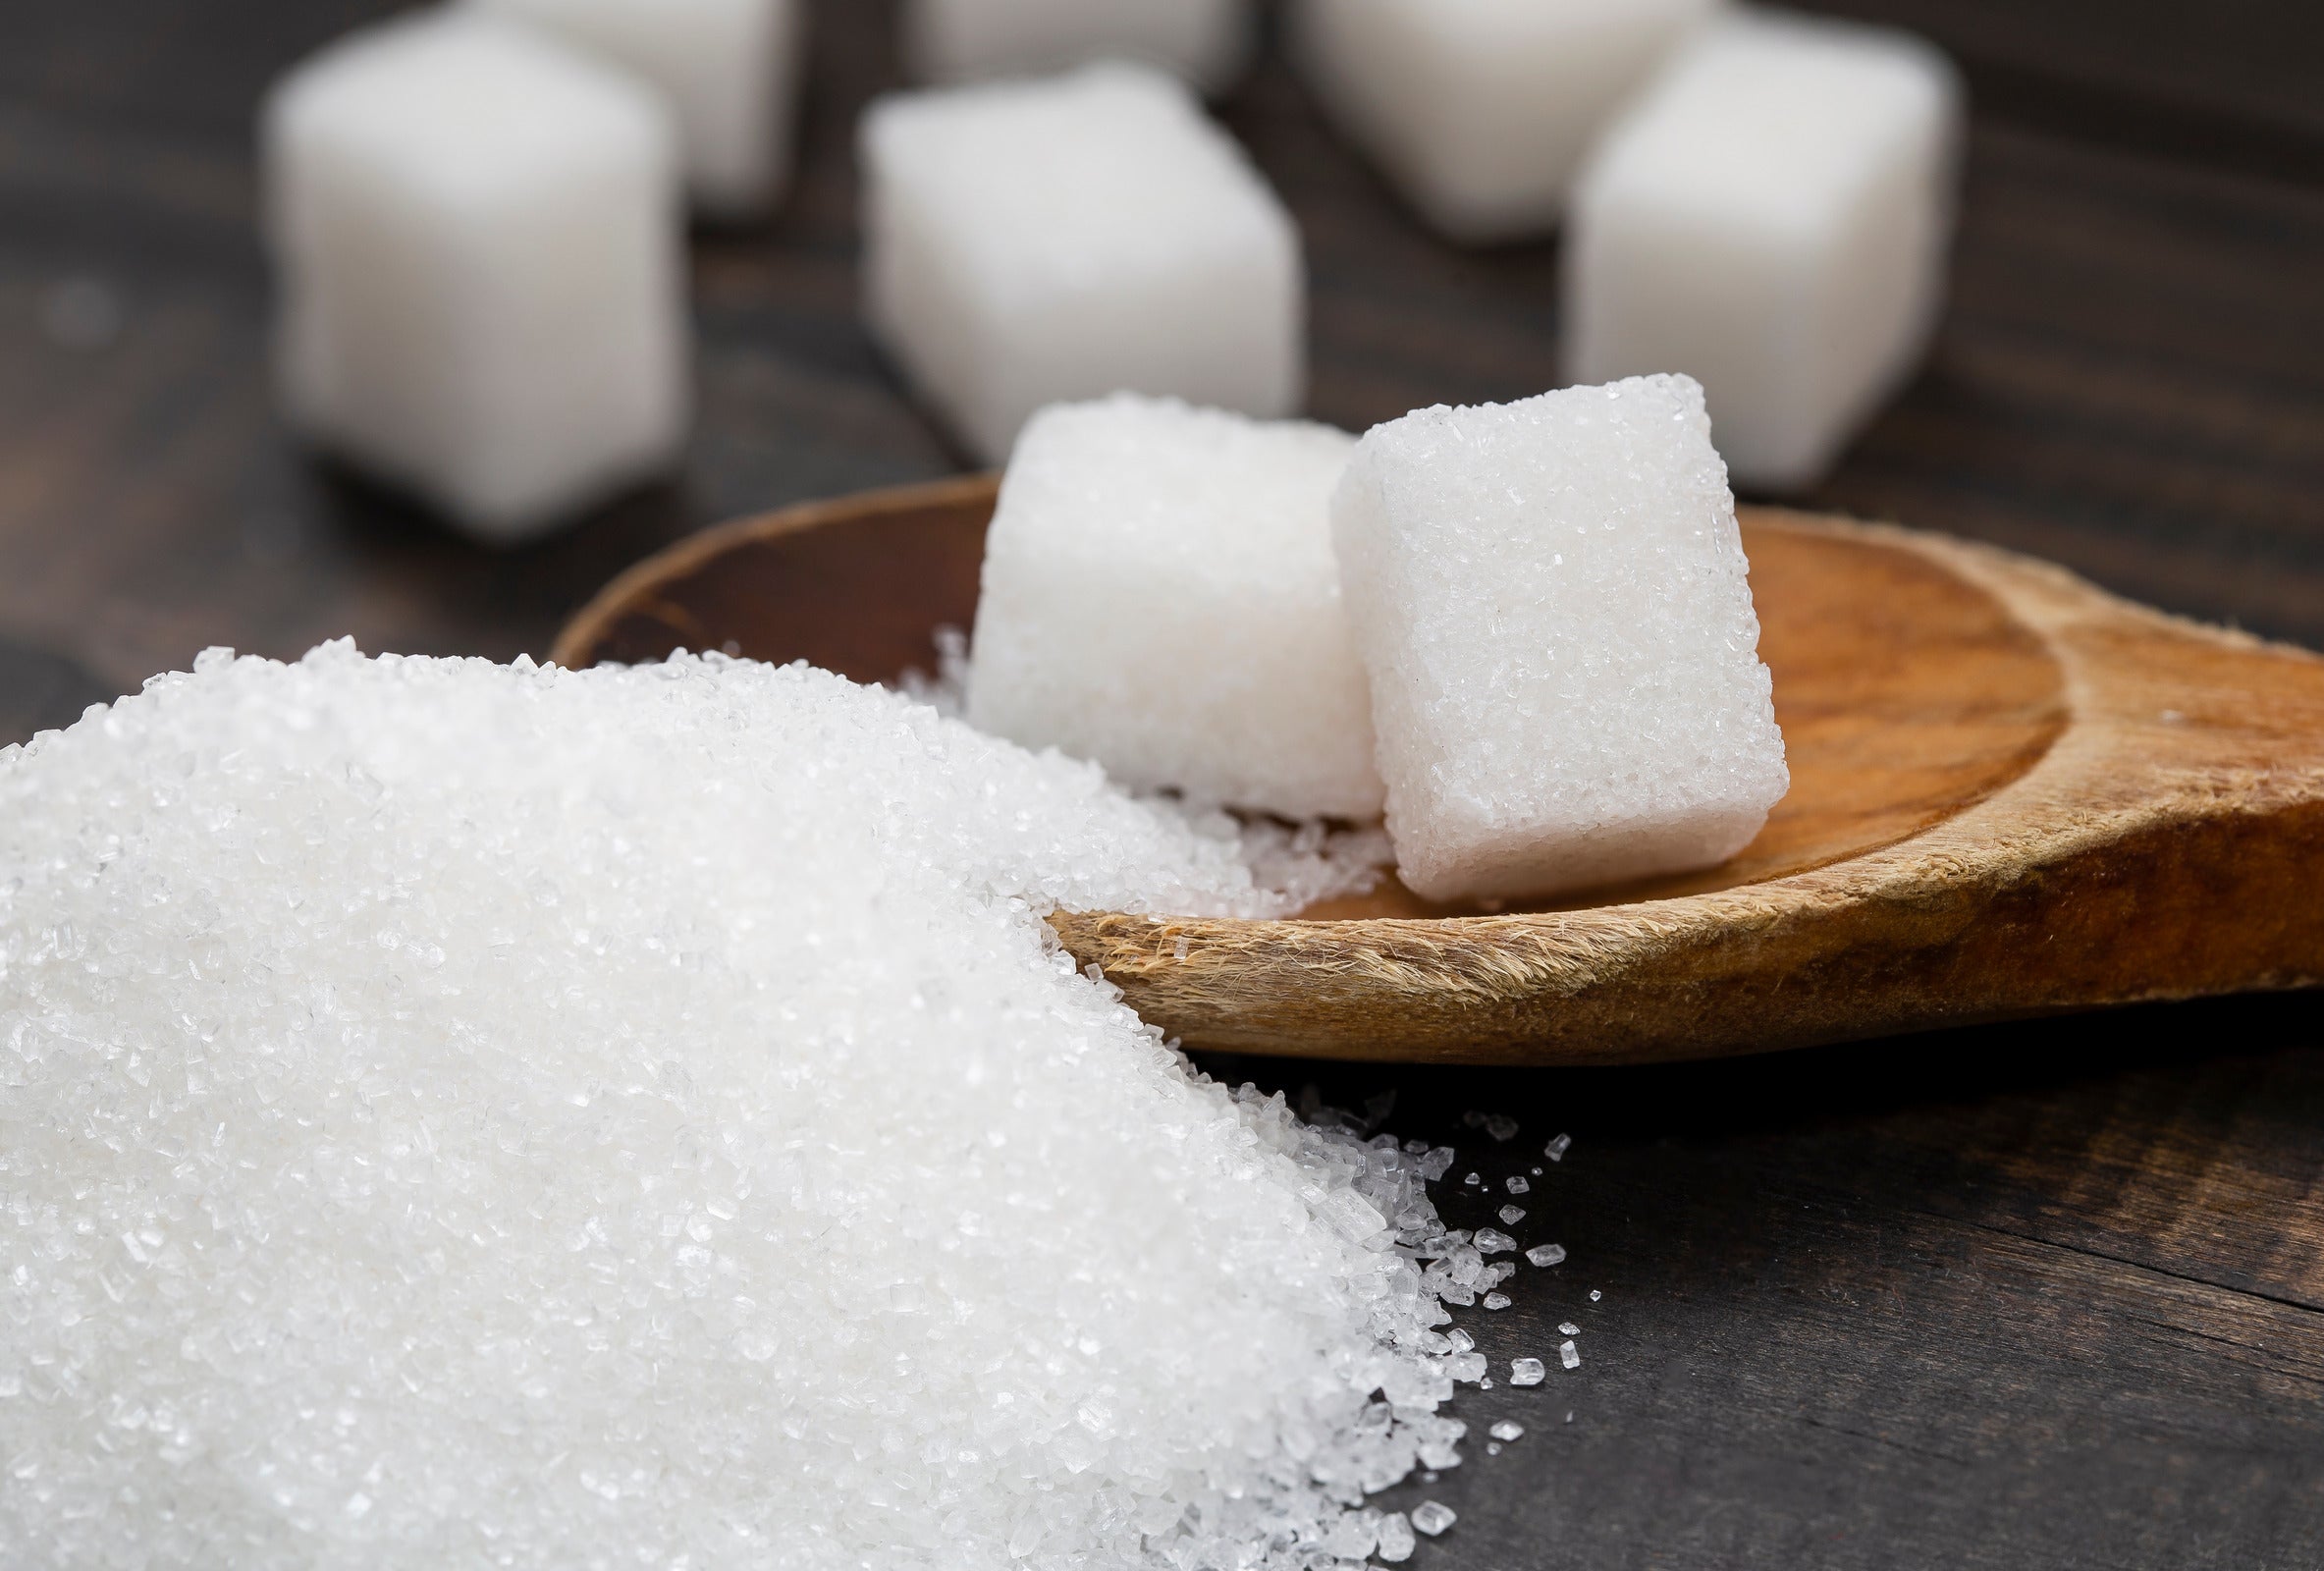 5 Precautions Before Using Sugar To Heal Wounds